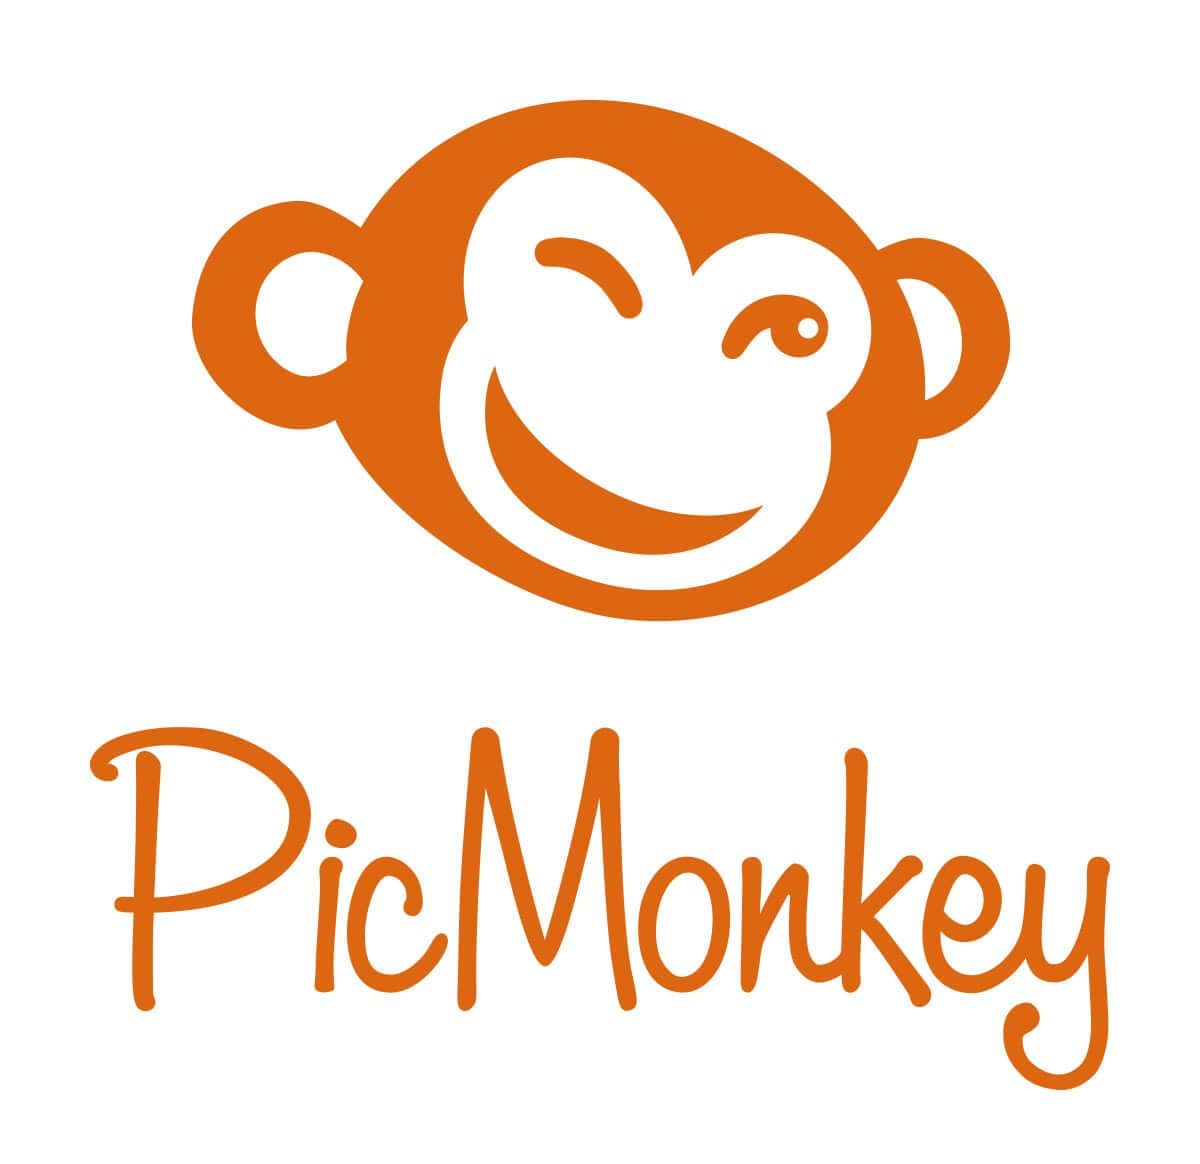 PicMonkey Launches Real-Time Collaboration Features, Empowers People to Create Together | Business Wire